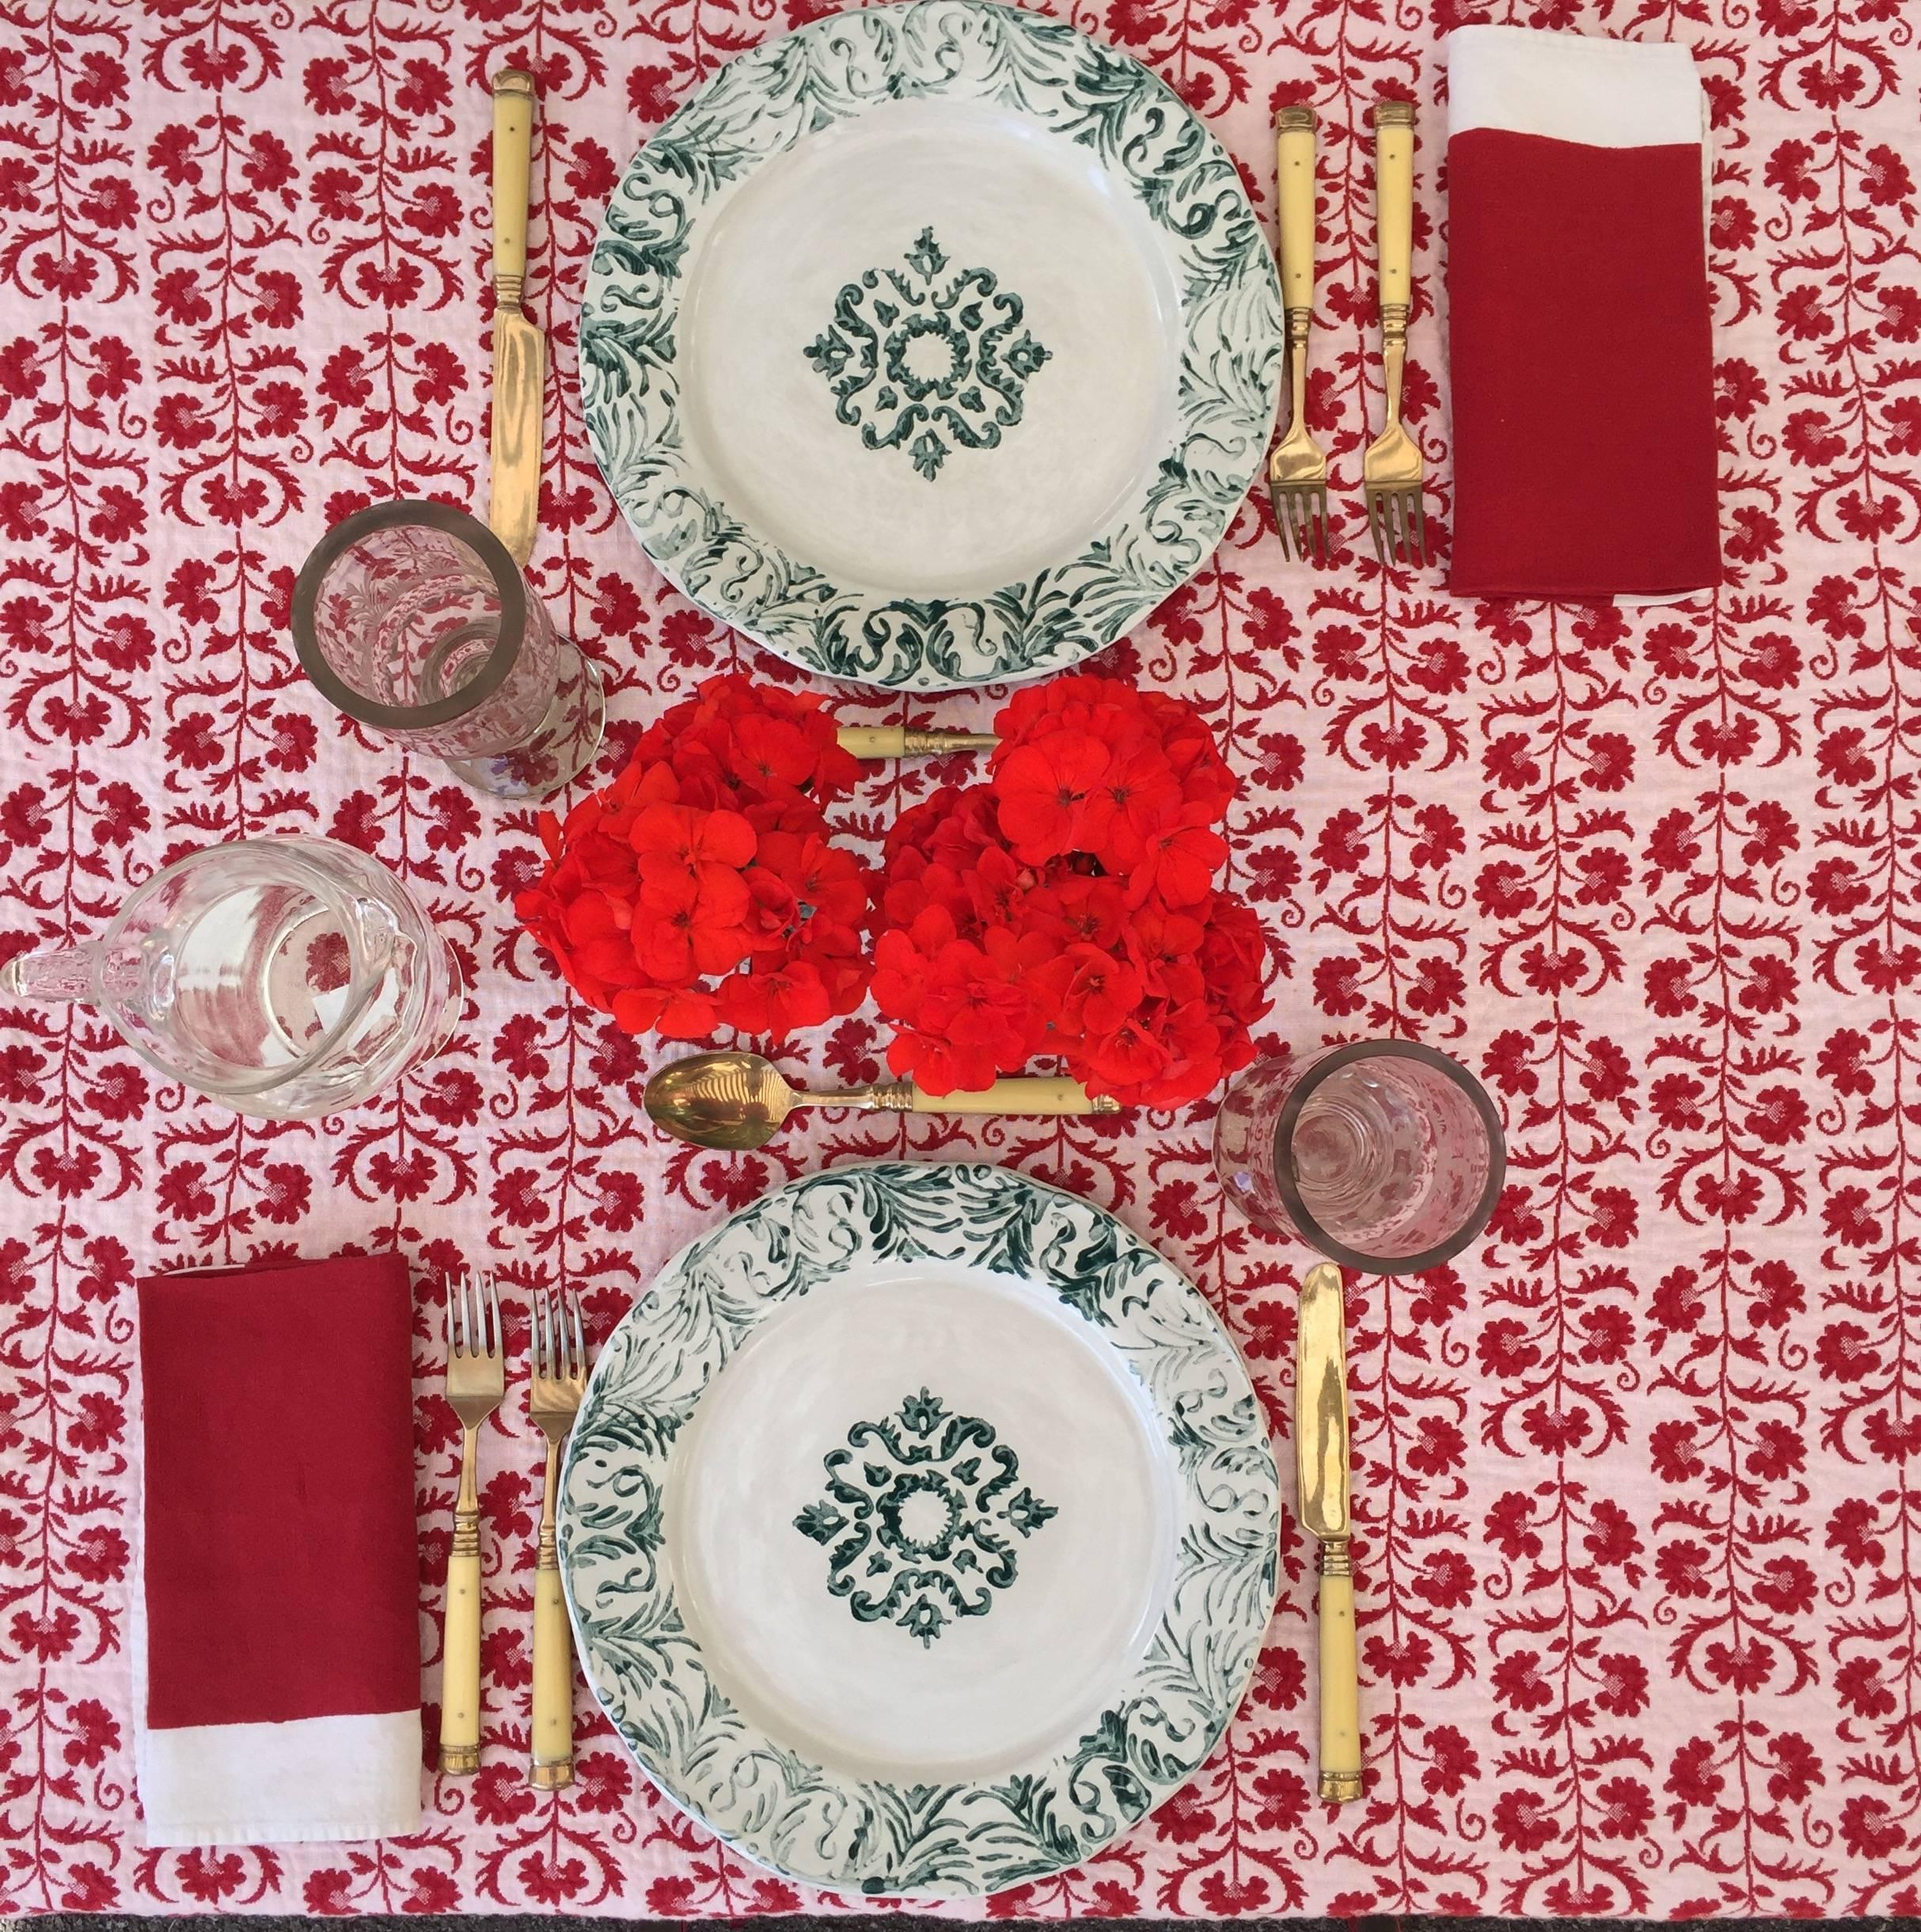 Handmade red squared tablecloth
This tablecloth is made with jacquard pure linen. The floral motif in red and white is influenced by traditional Suzani patterns. “Suzani” refers to the traditional needlework of Uzbekistan.
The double faced textile